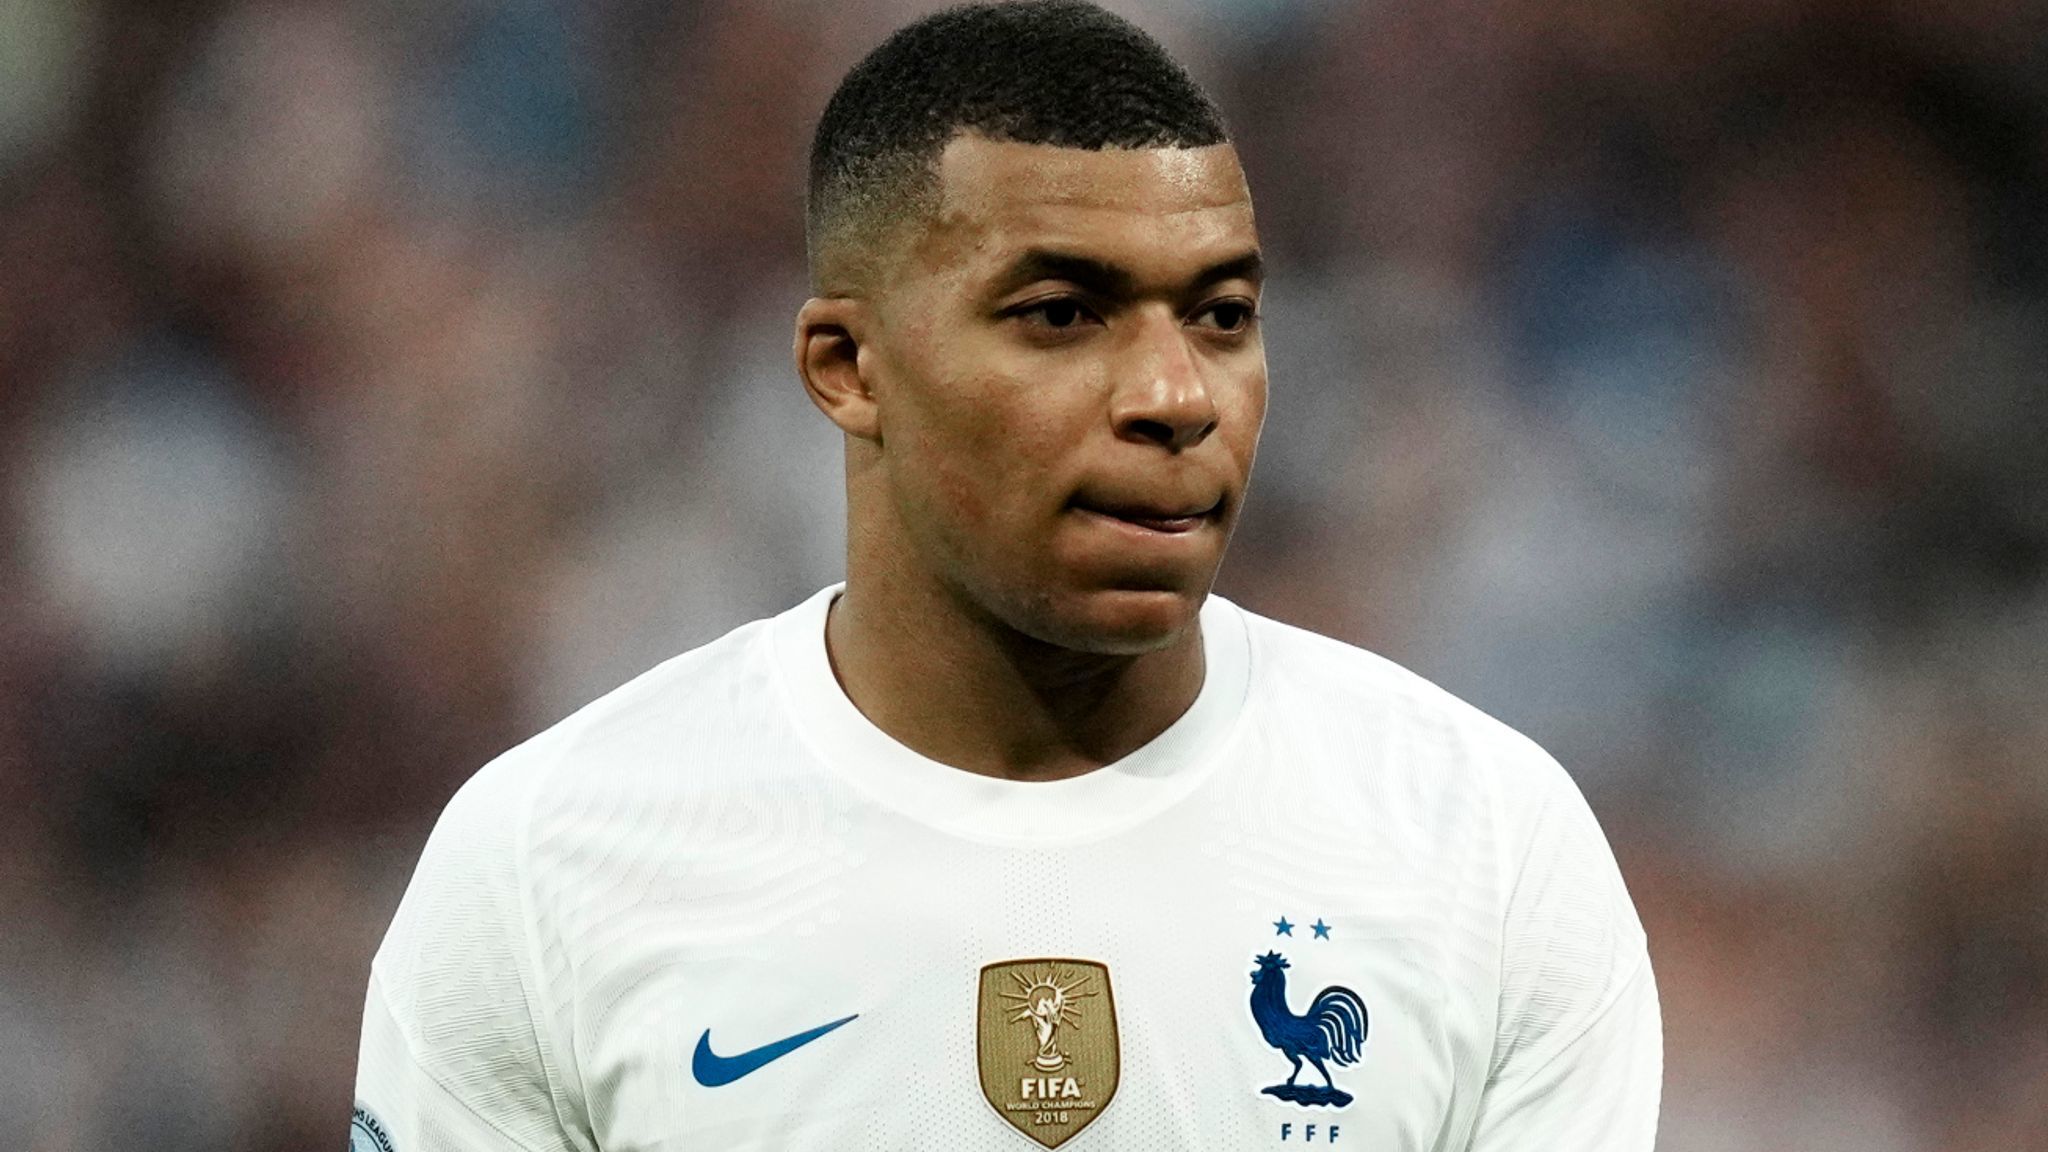 Real Madrid crosses Mbappe out its list of potential transfers, the club will try to sign Haaland in 2024